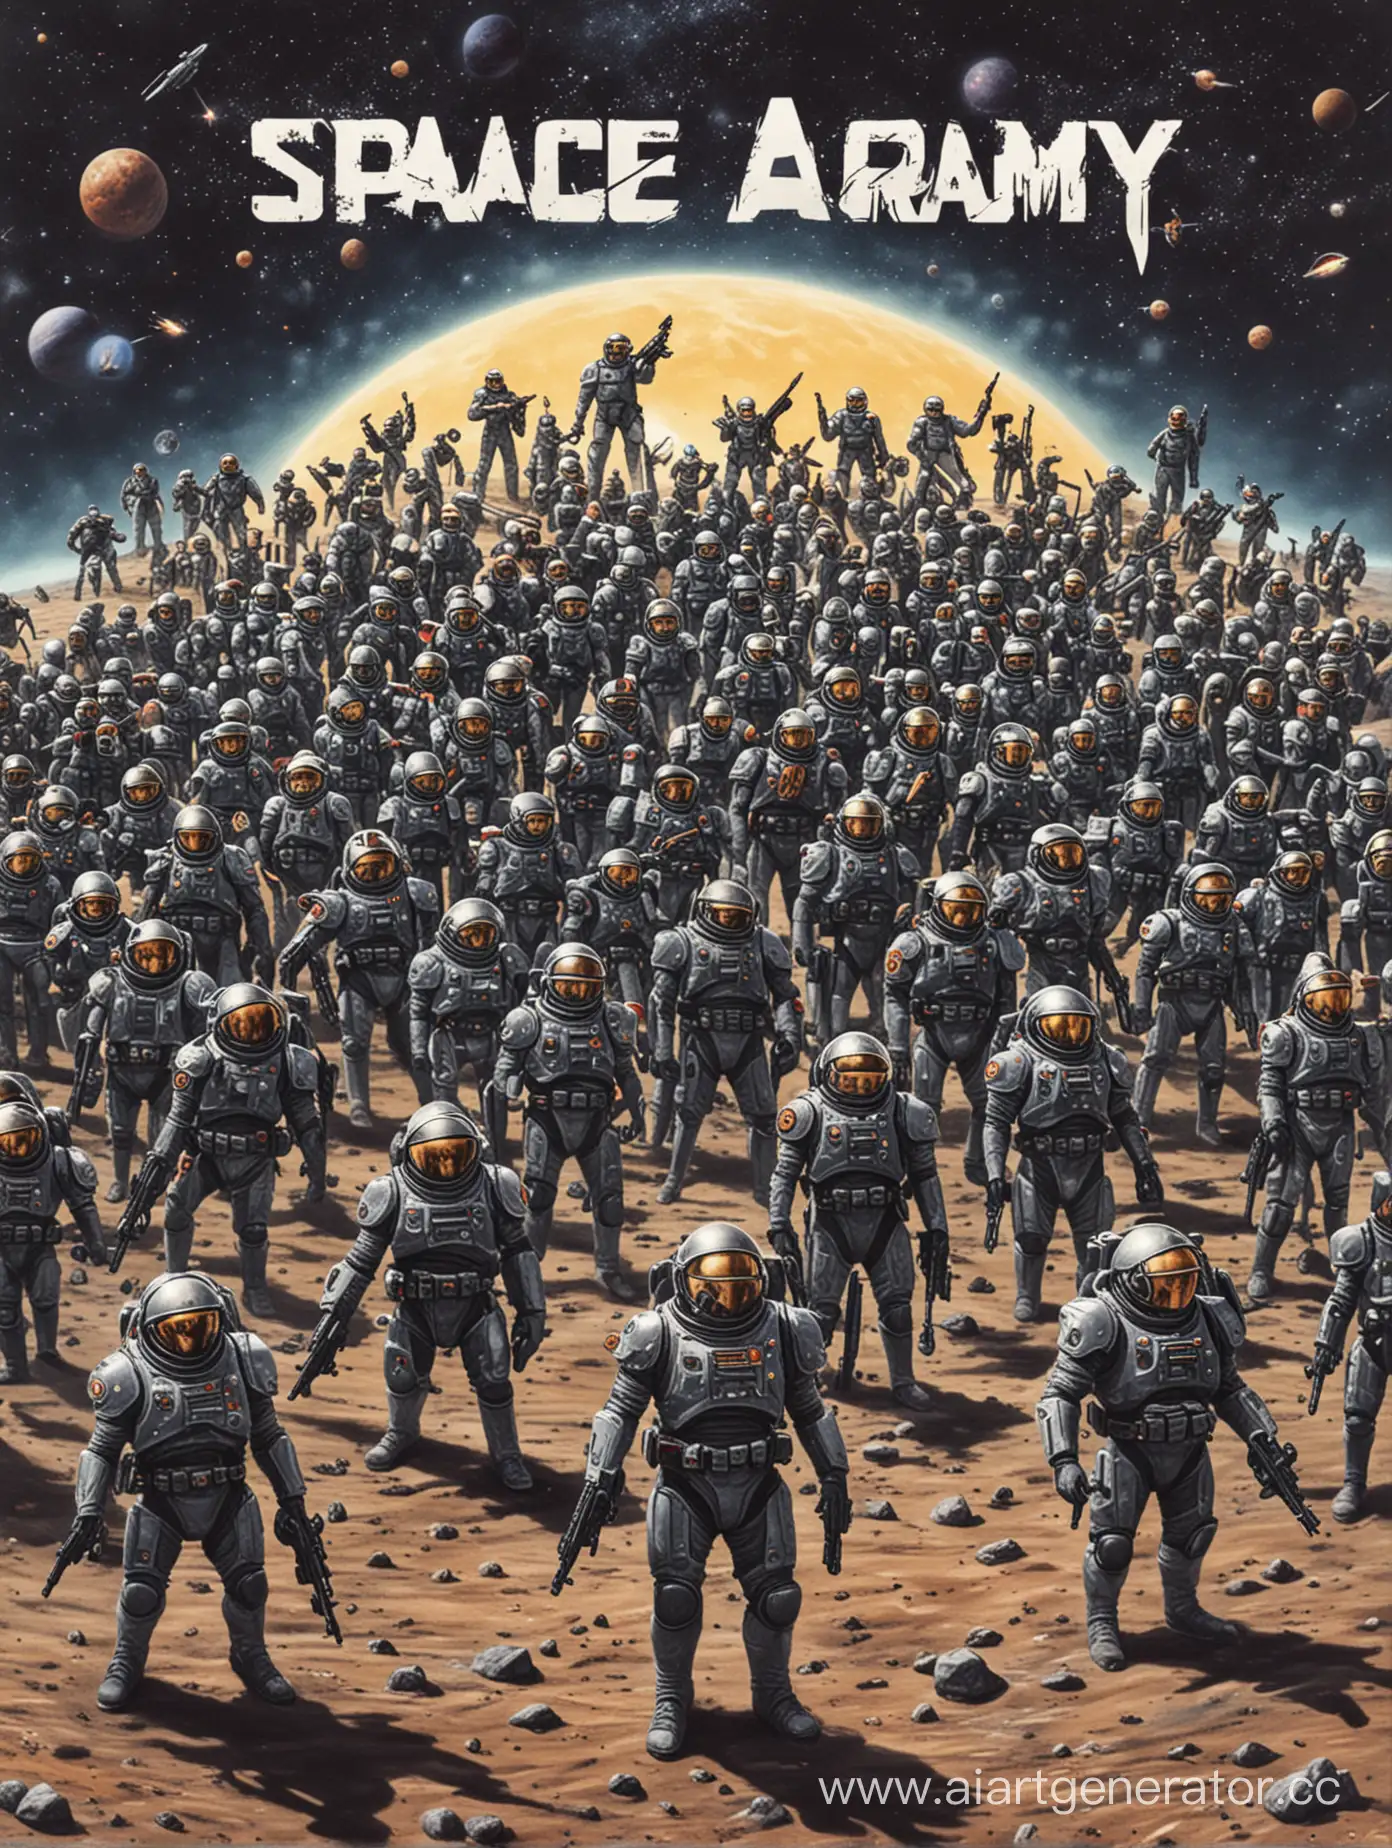 Futuristic-Space-Army-Battling-Alien-Invaders